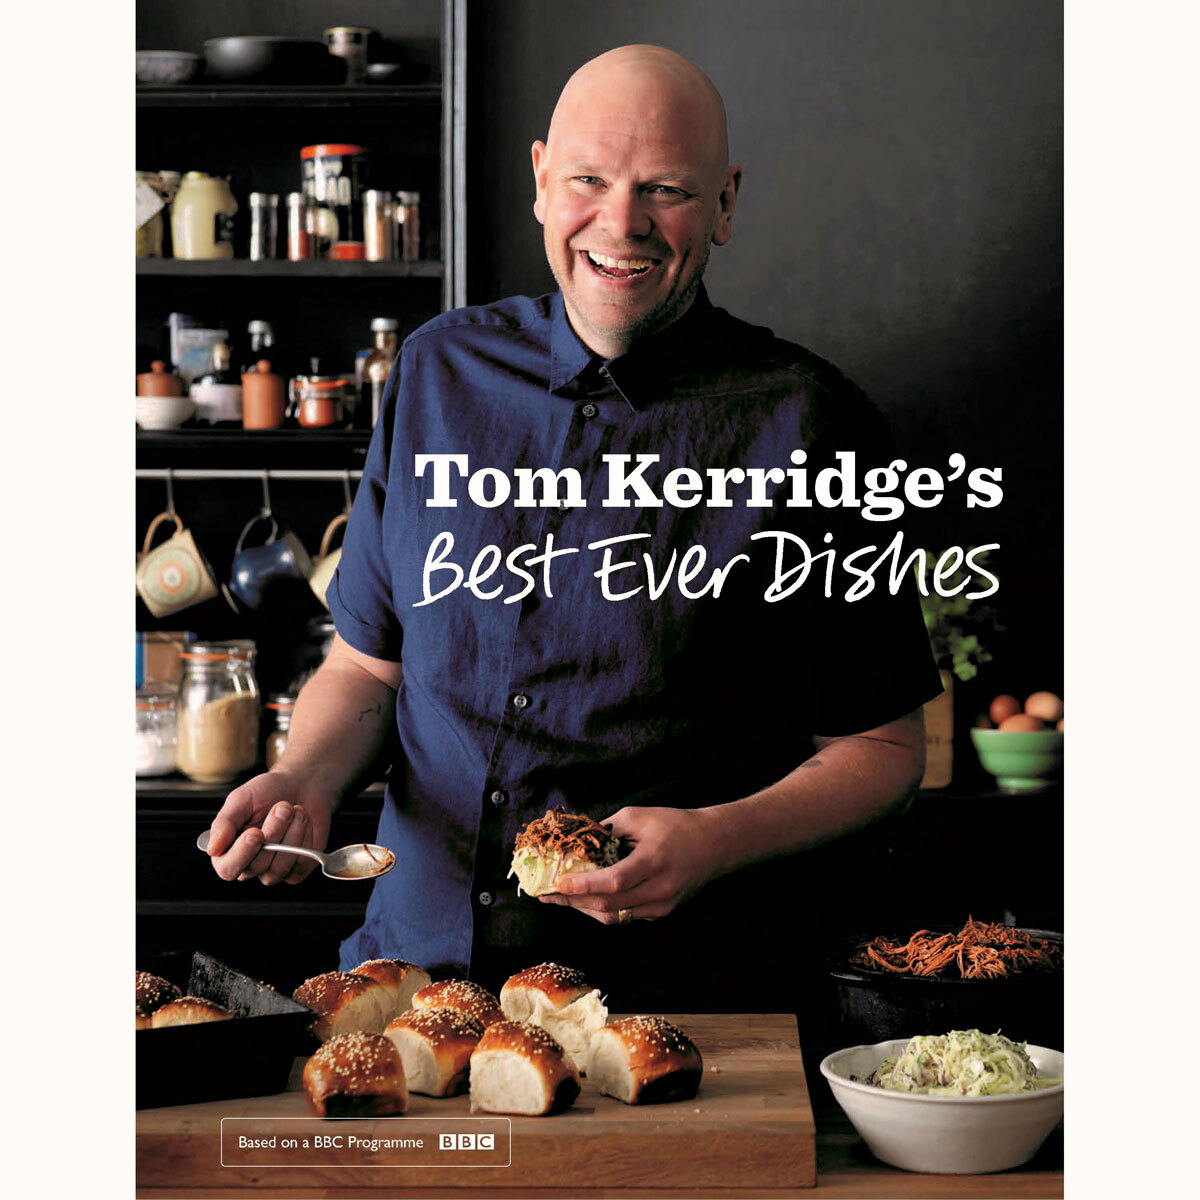 Front Cover images of Tom Kerridge Best ever dishes